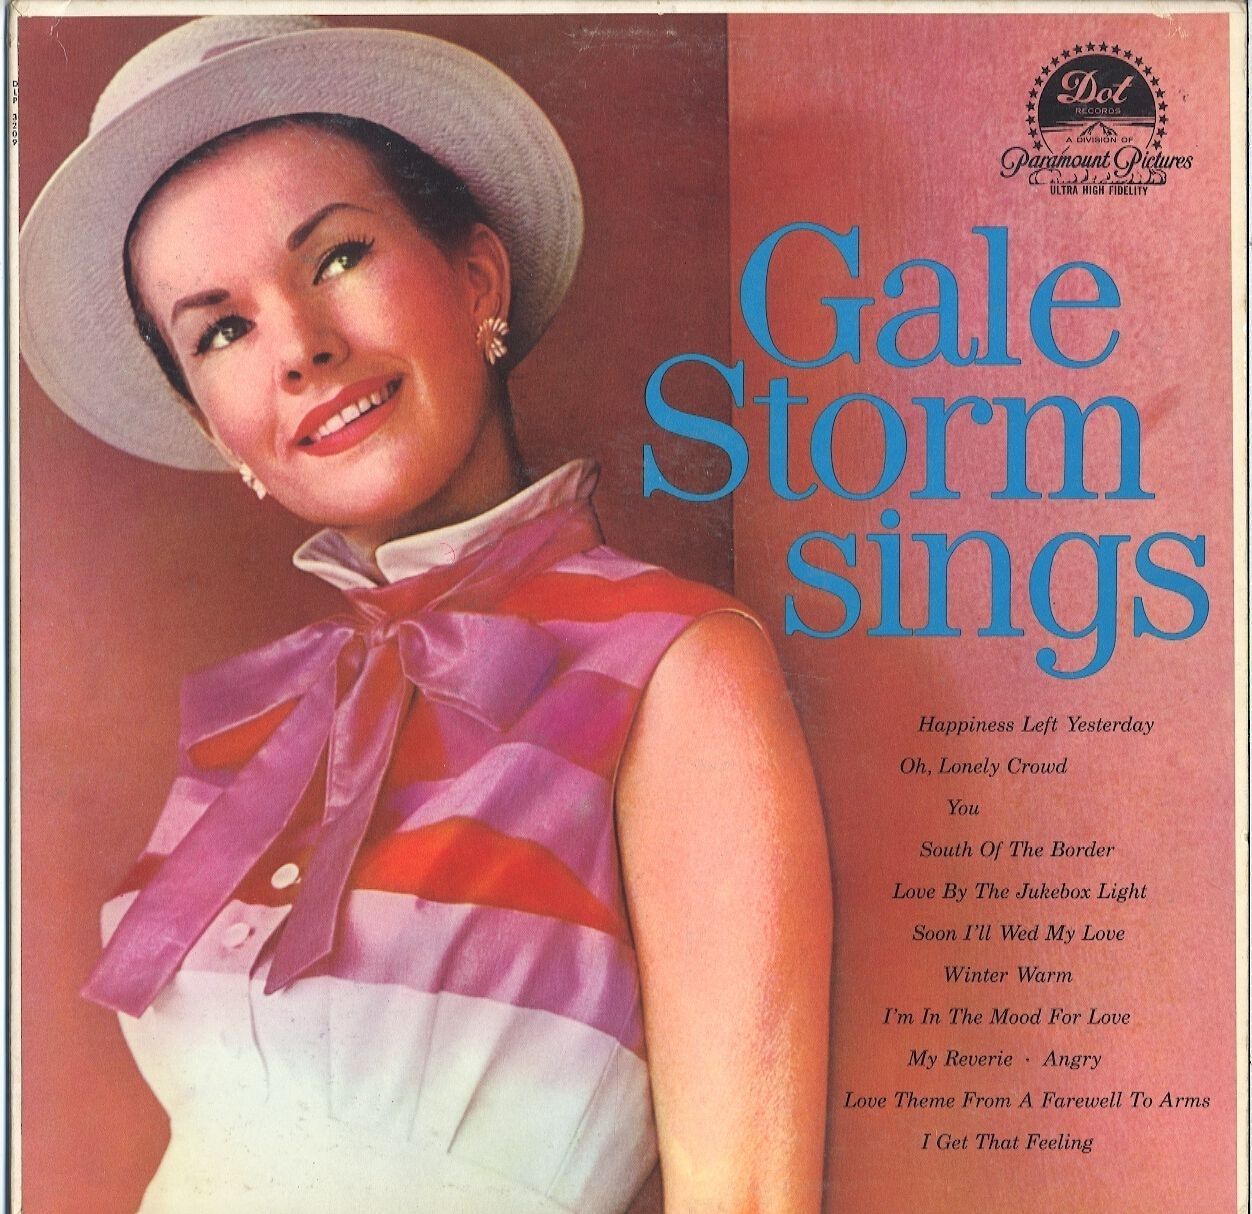 gale storm house. gale-storm-house. 